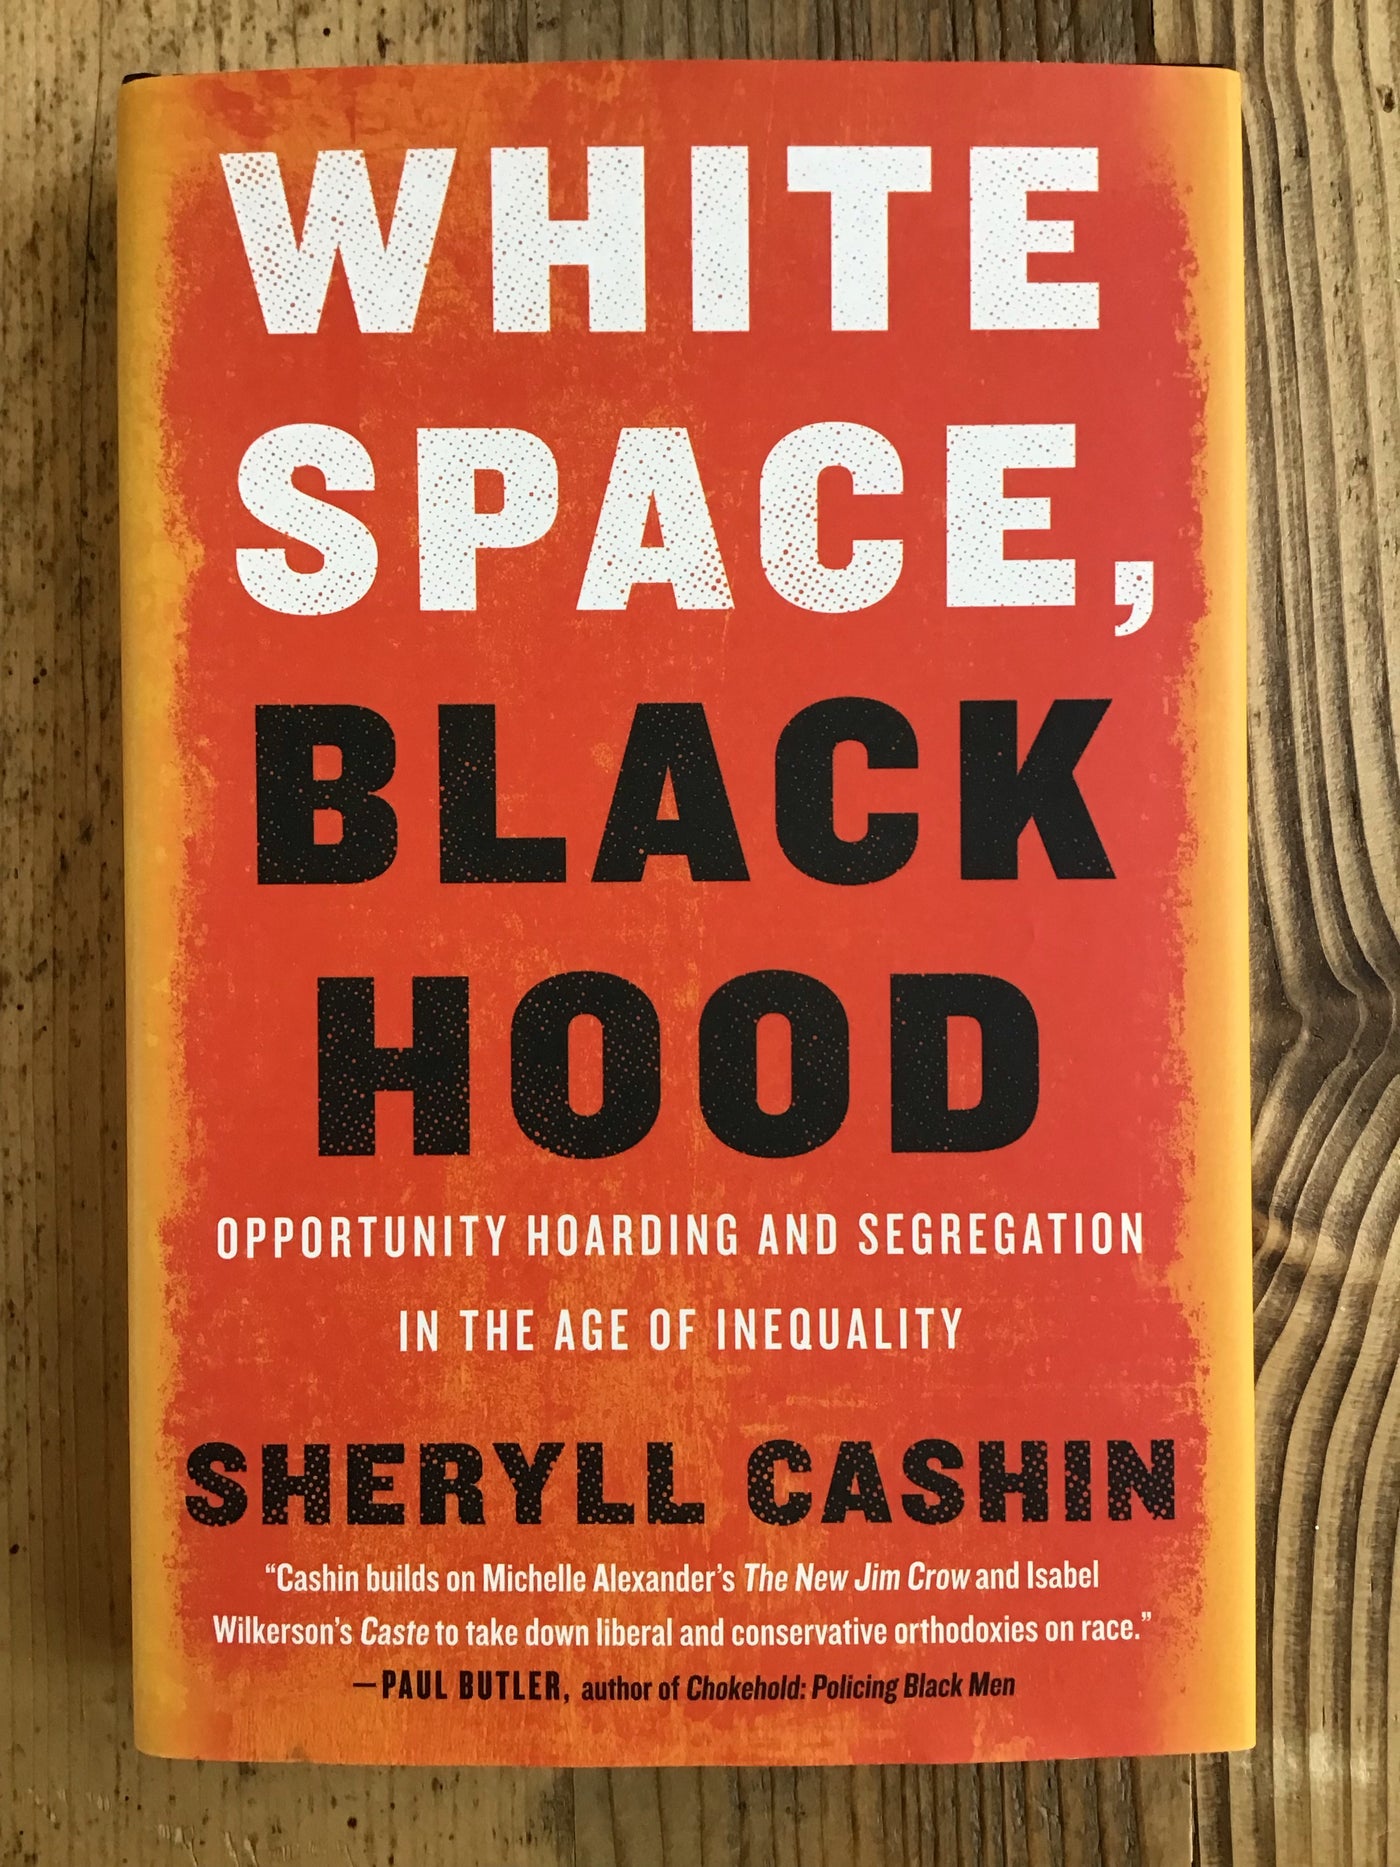 White Space, Black Hood: Opportunity Hoarding and Segregation in the Age of Inequality - SALE